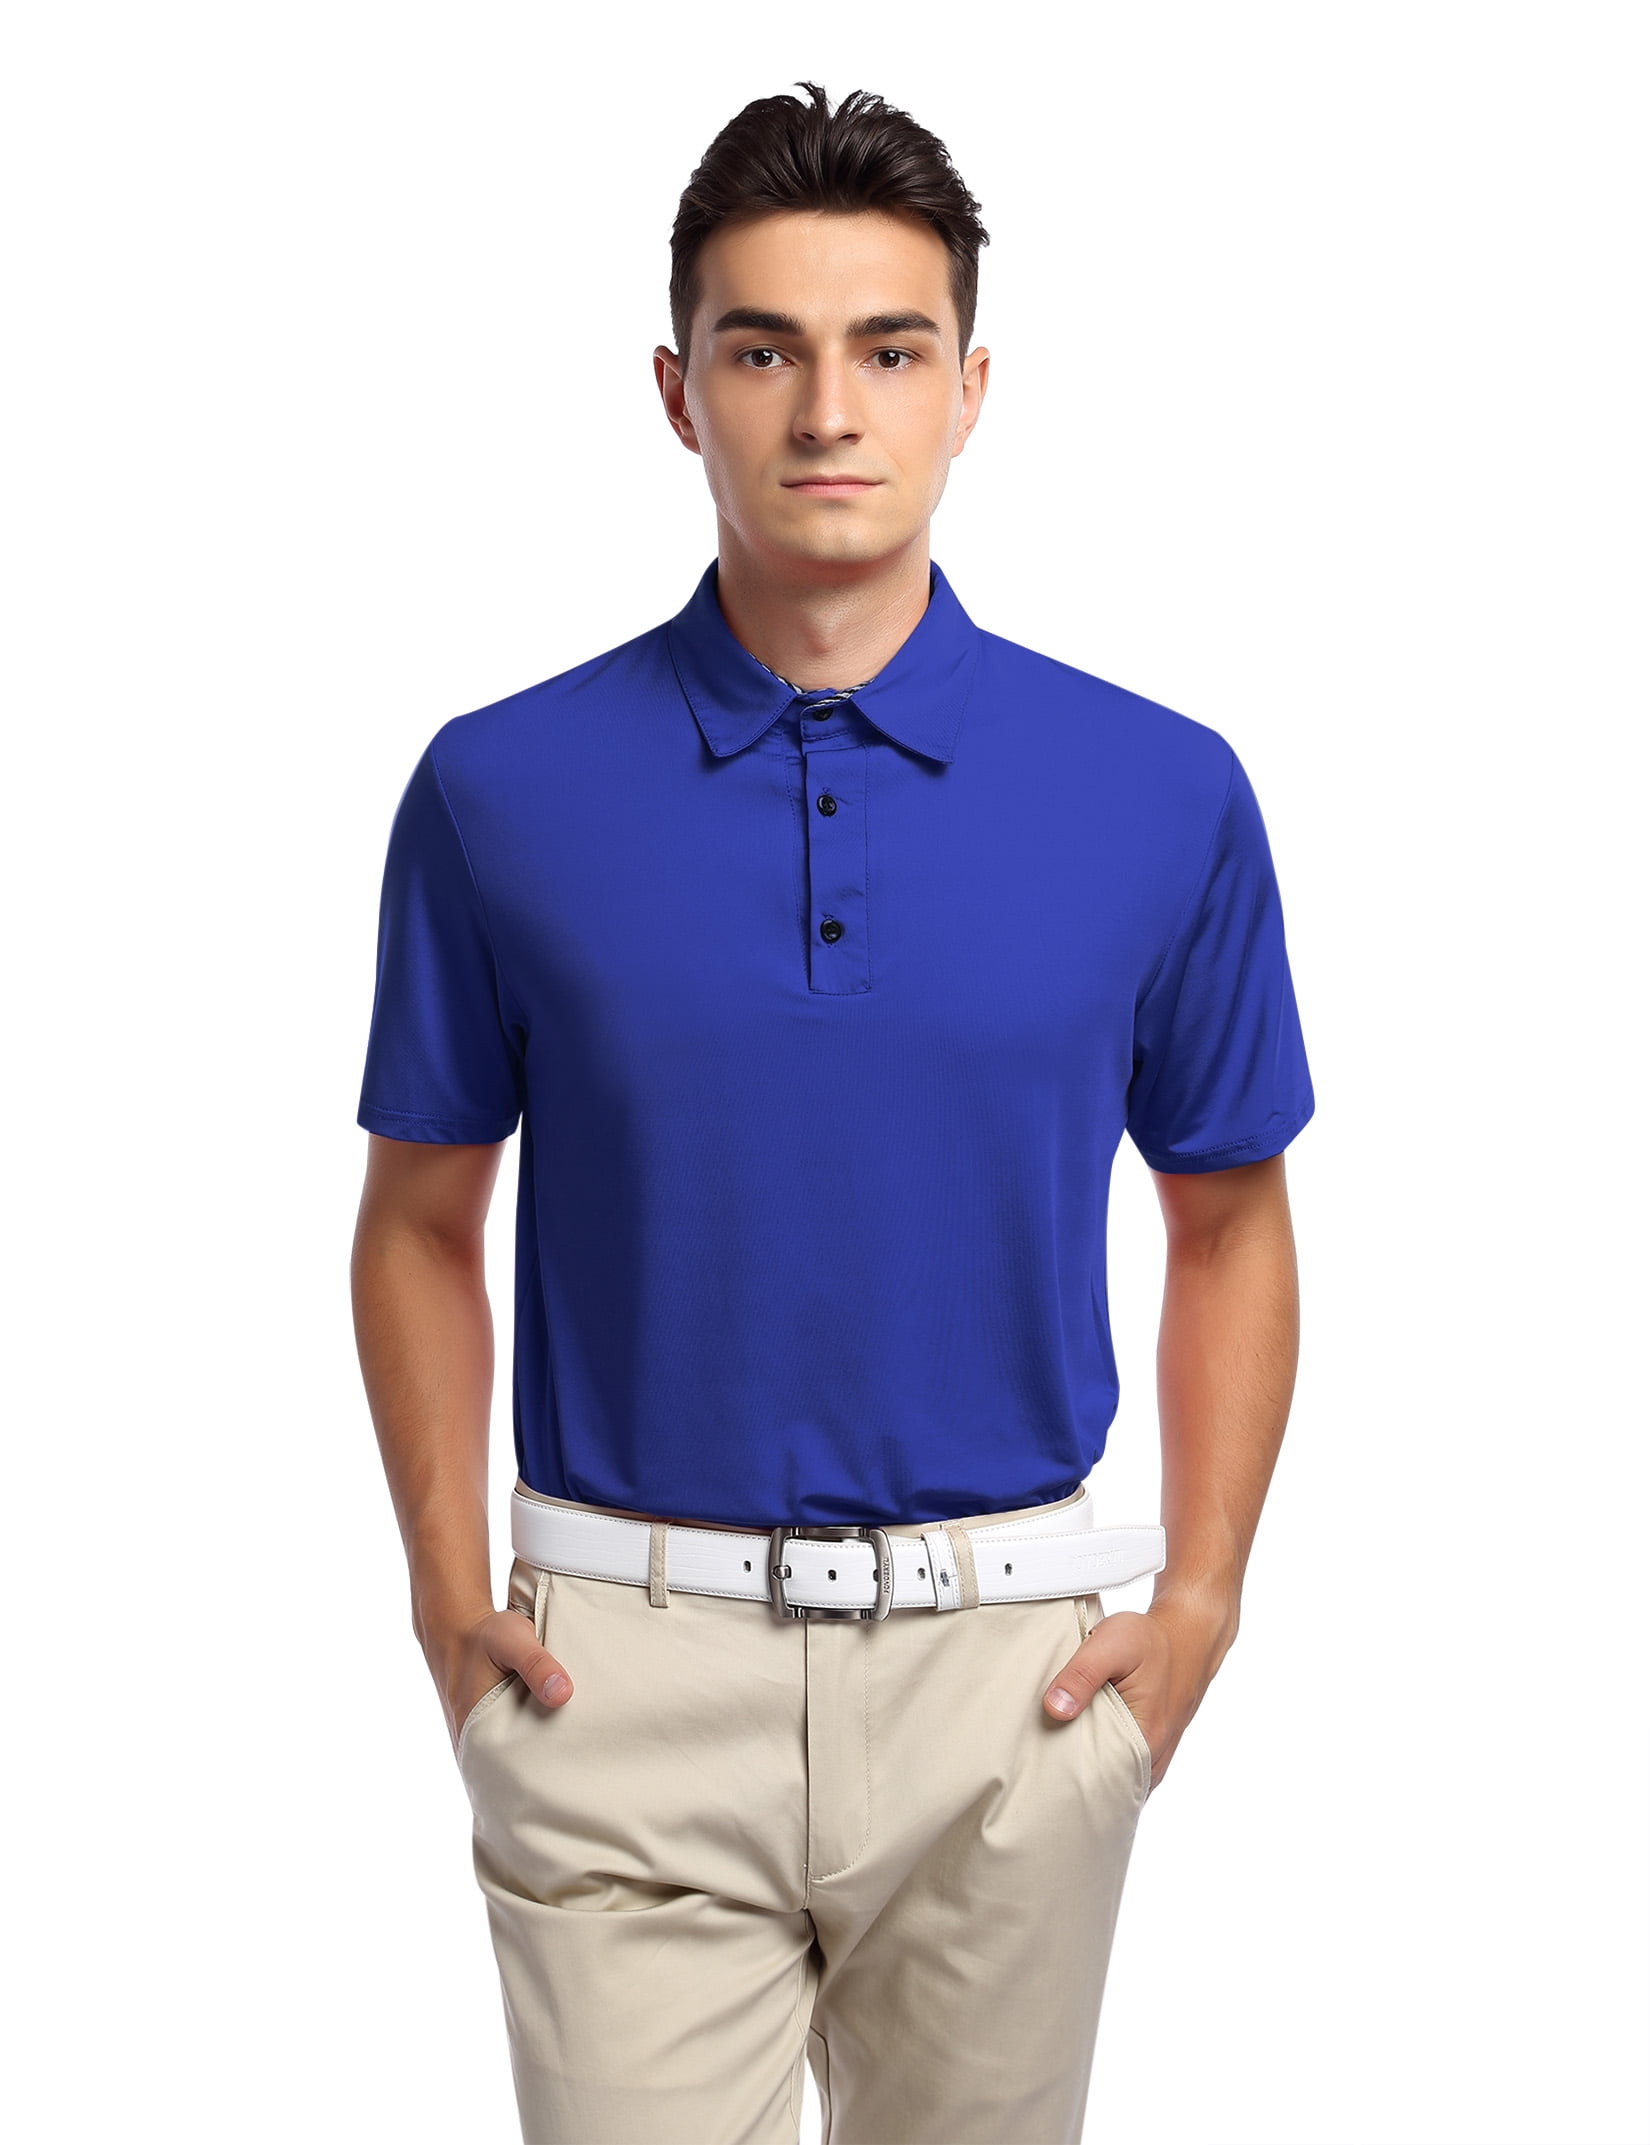 HA-EMORE Men's Golf Shirts Short Sleeve Collared T Shirt Slim Fit Basic Dri  Fitted Casual Tshirts 